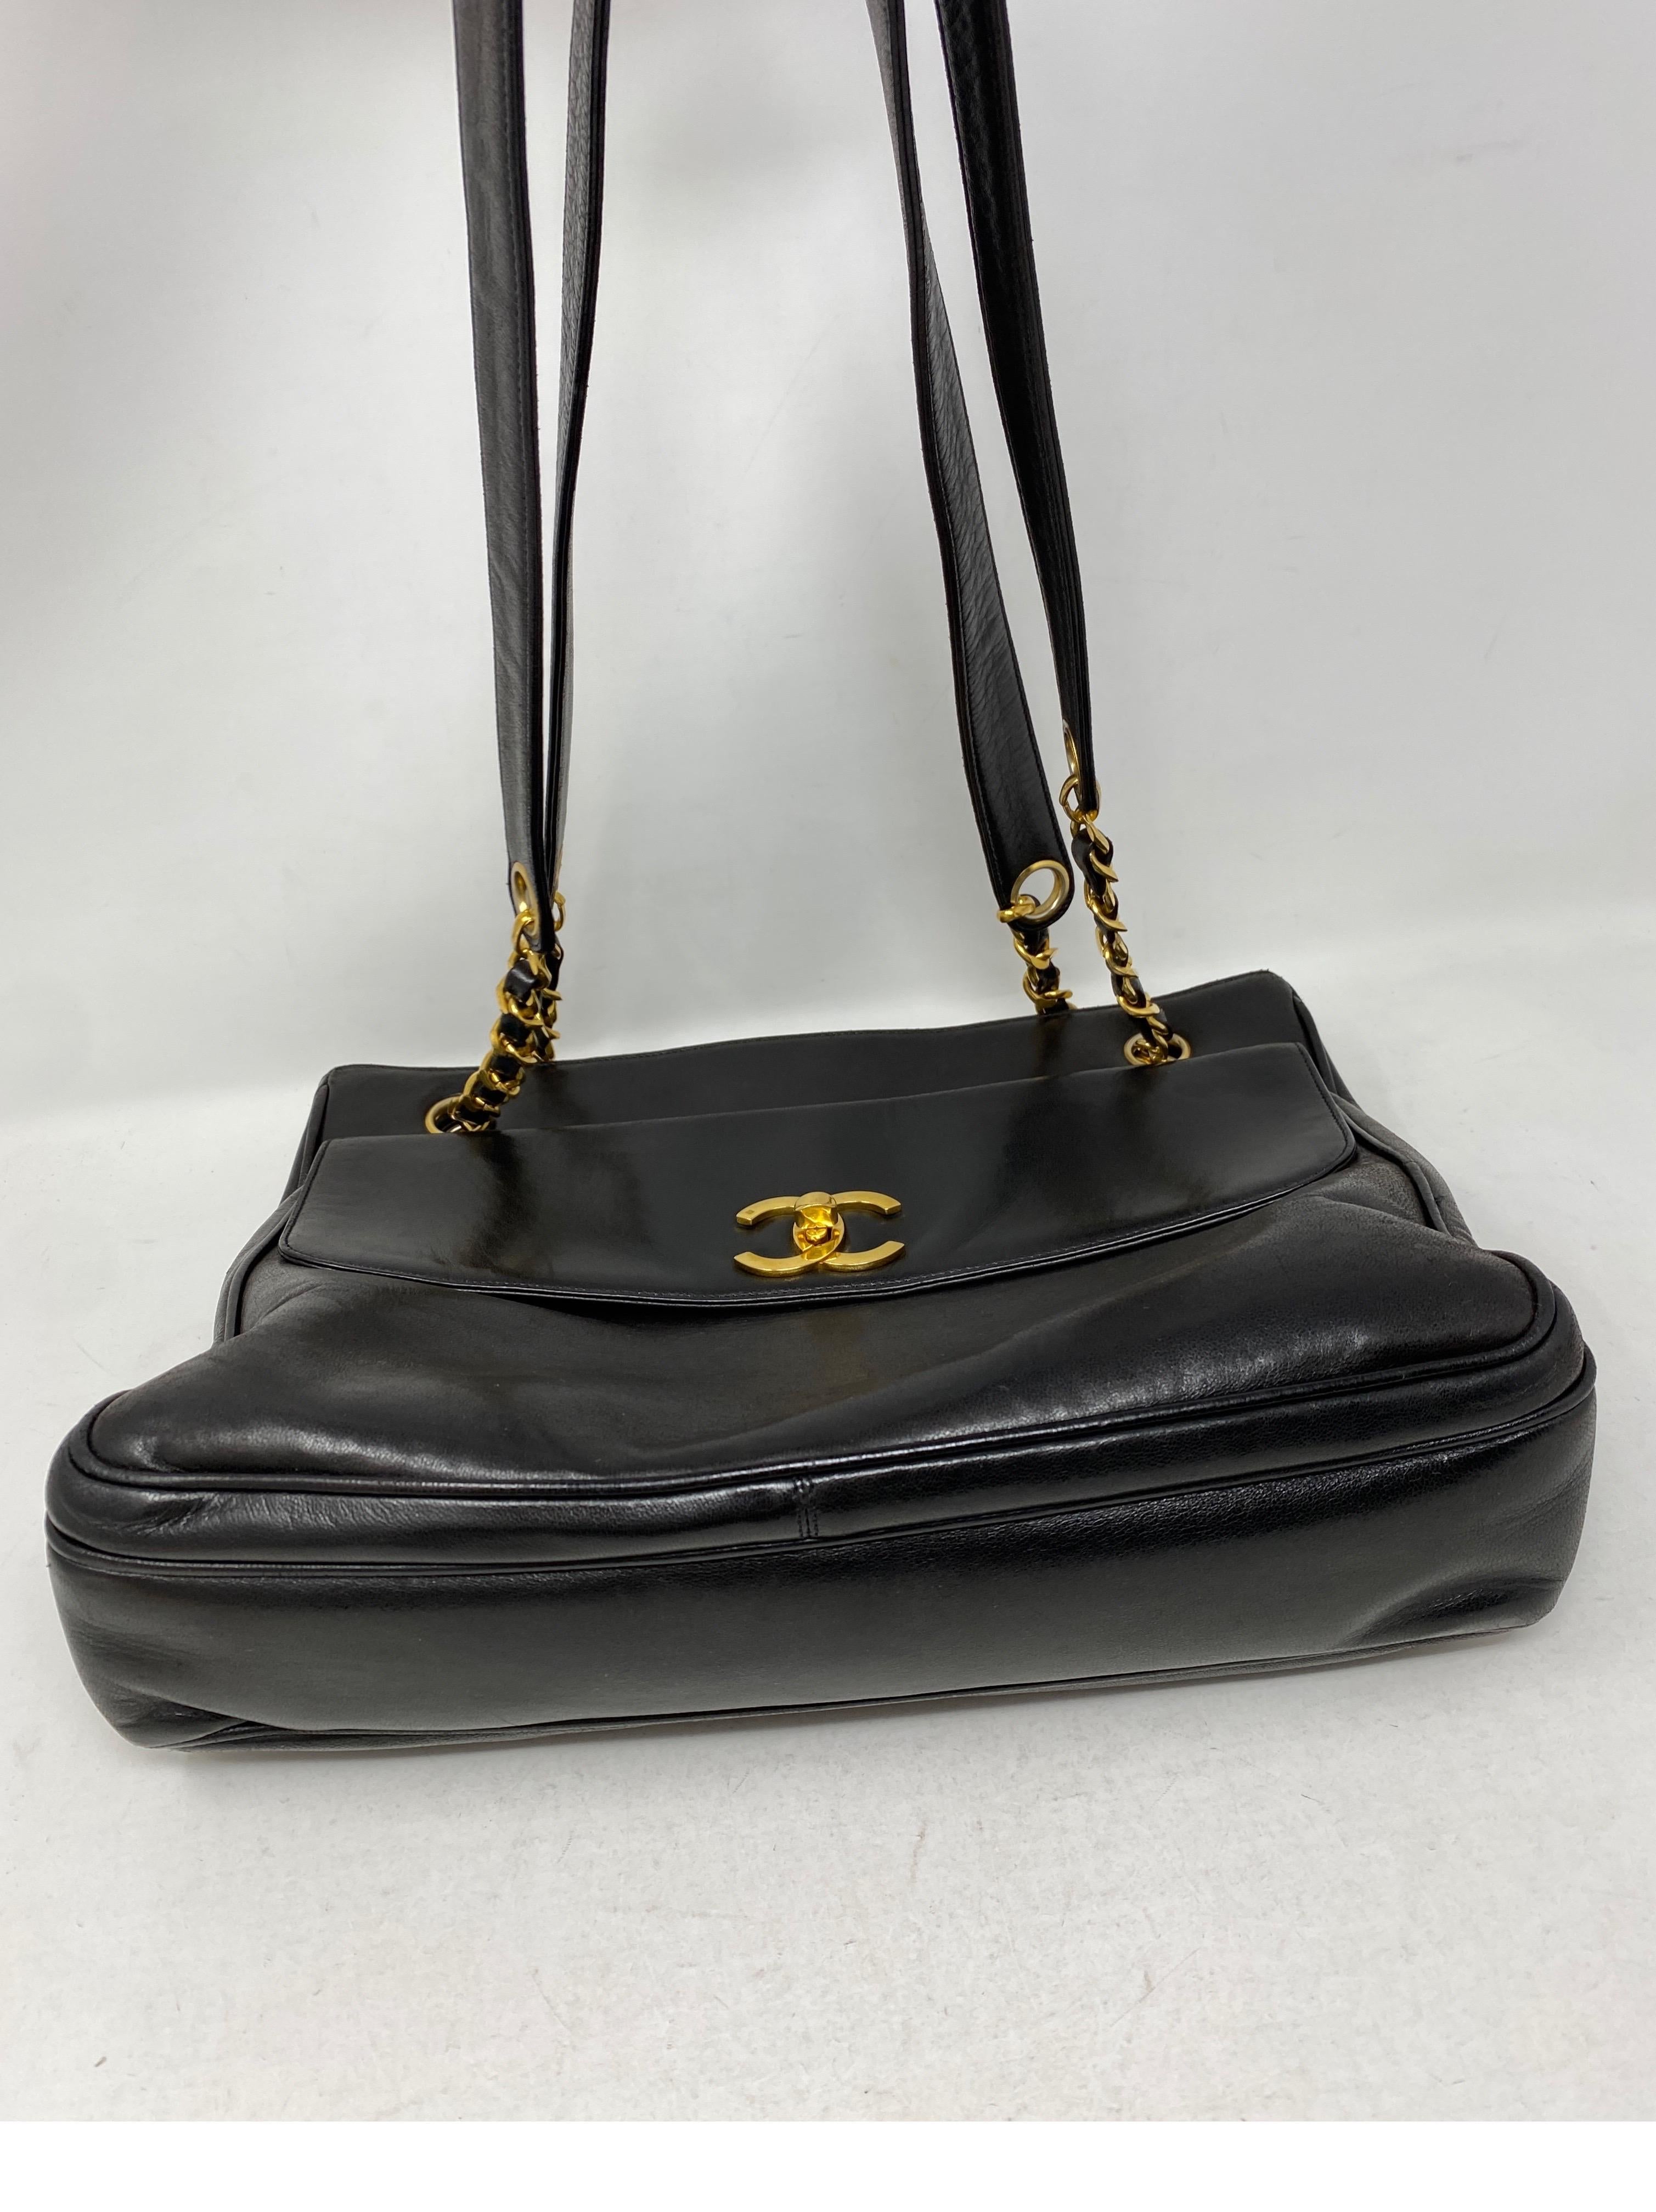 Women's or Men's 1990s Chanel Black Leather Tote Bag